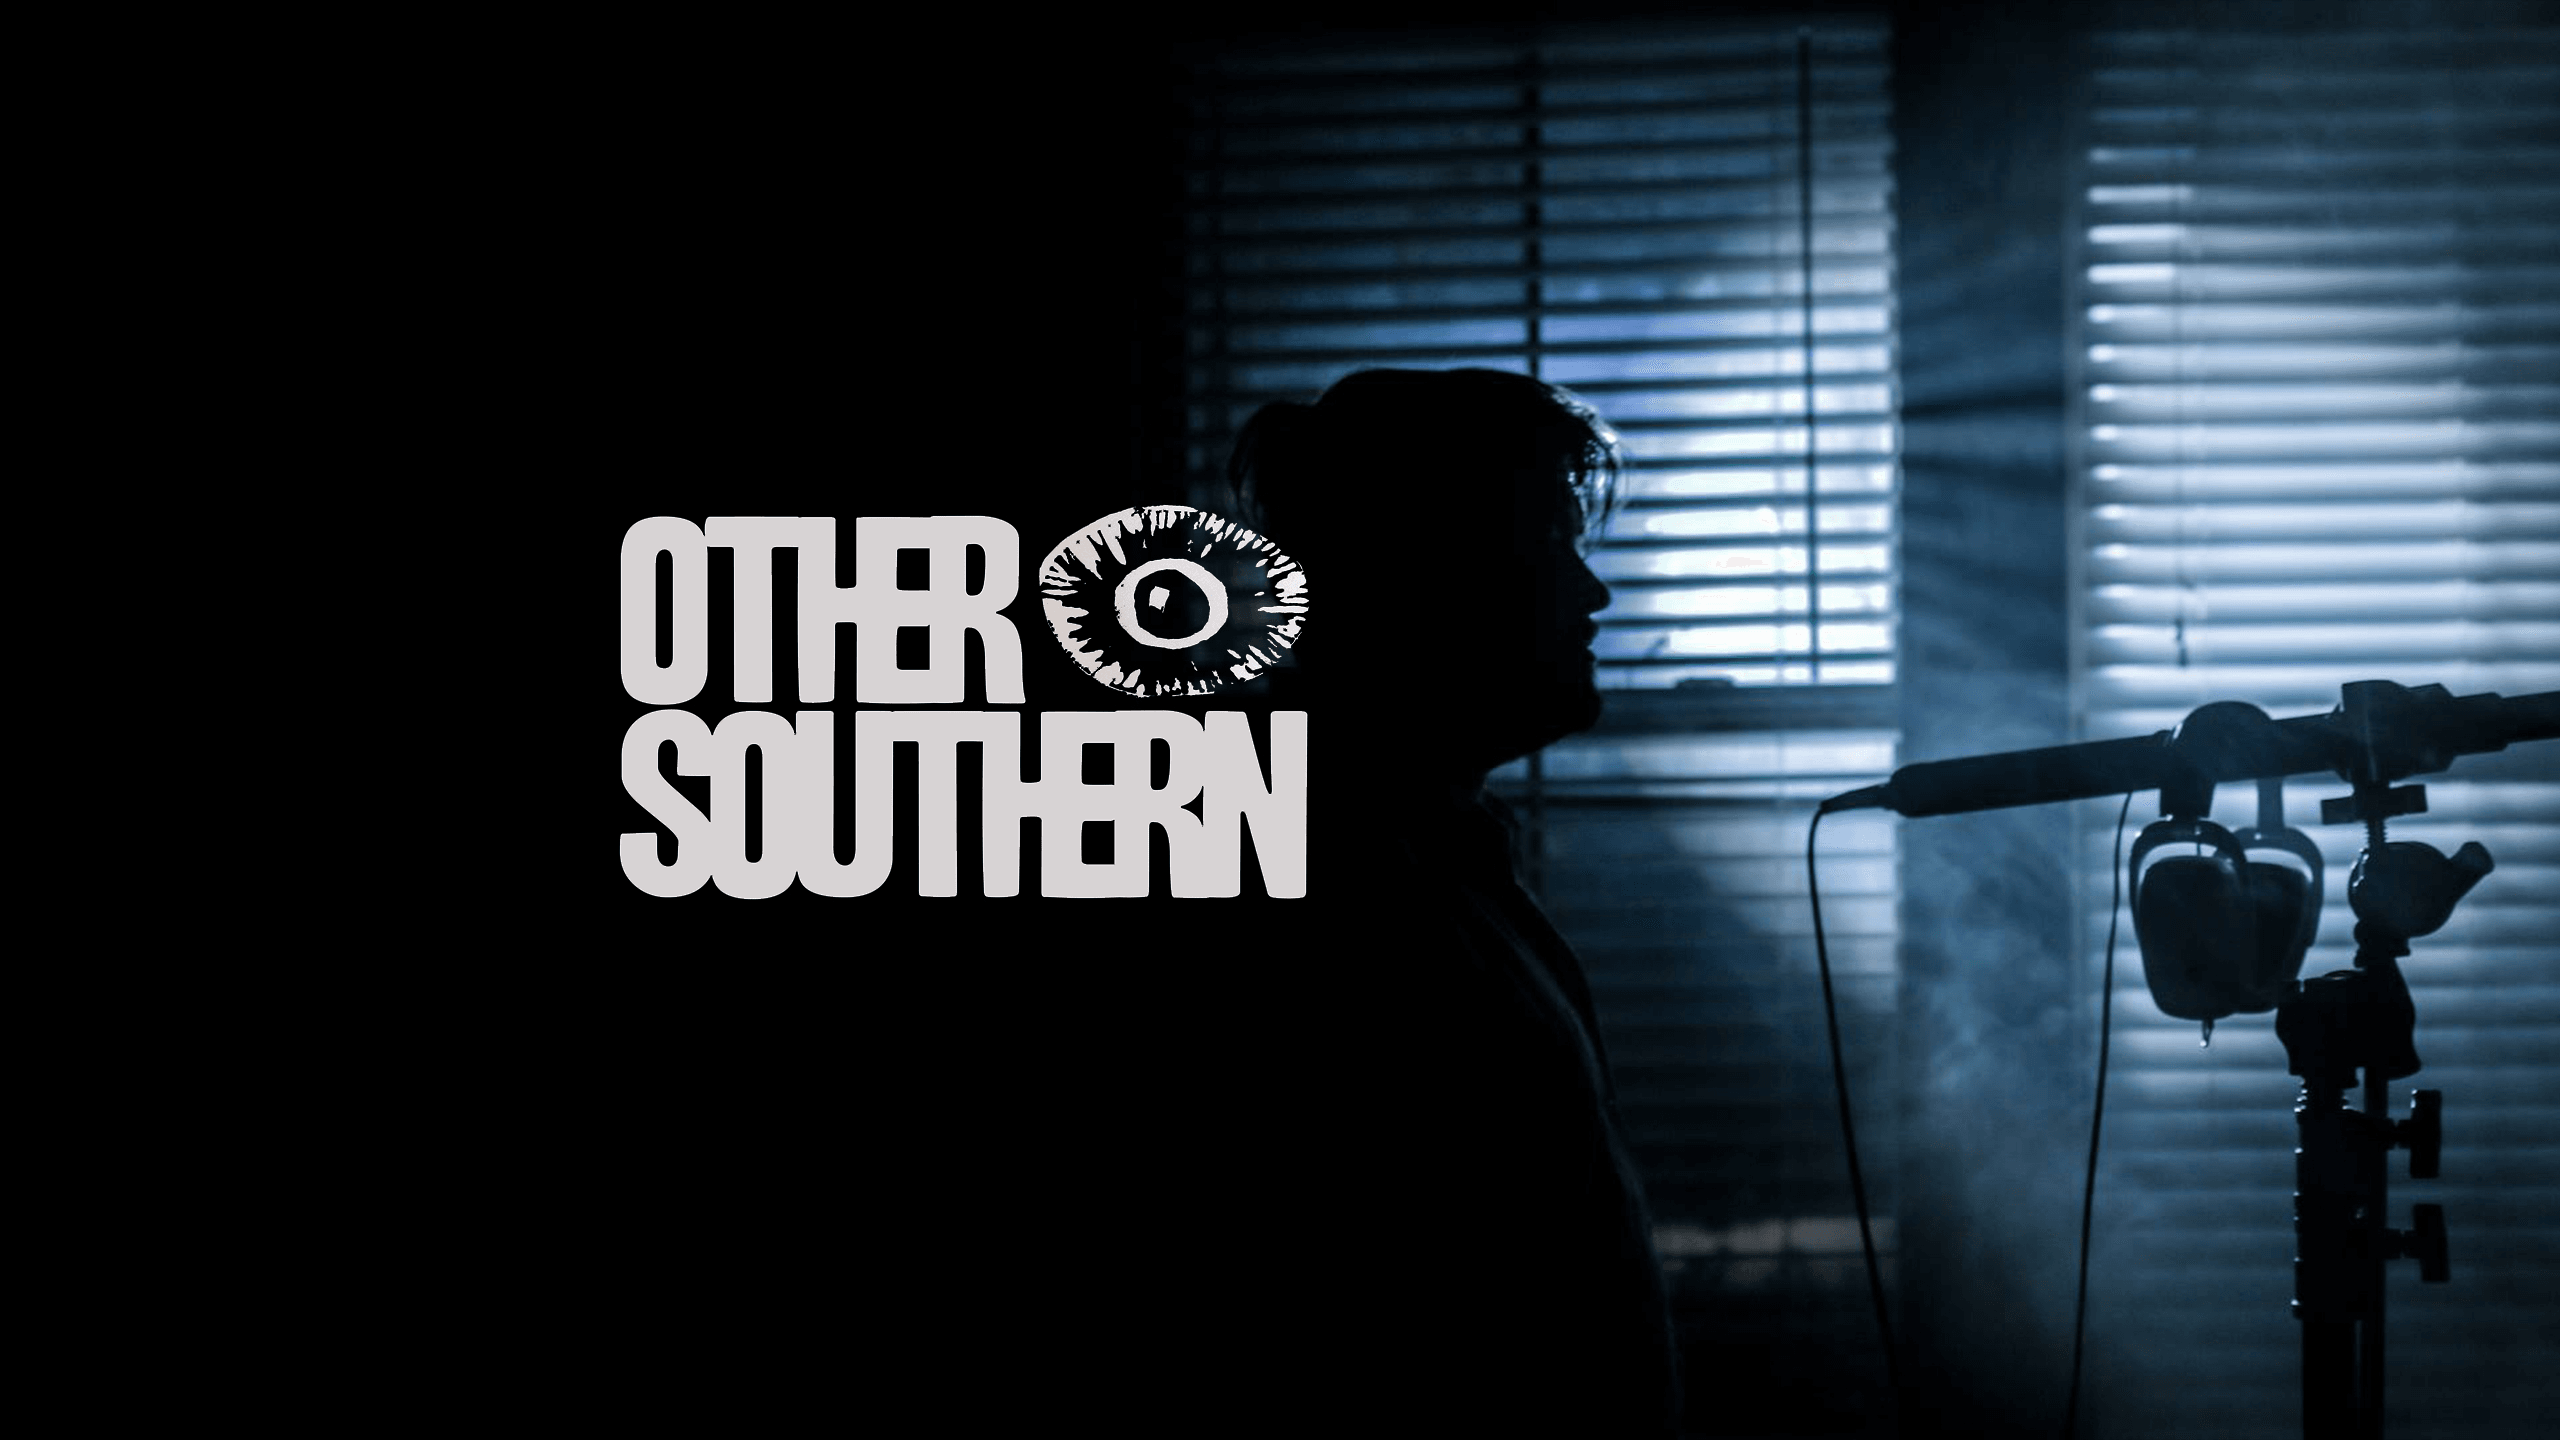 OtherSouthern 横幅